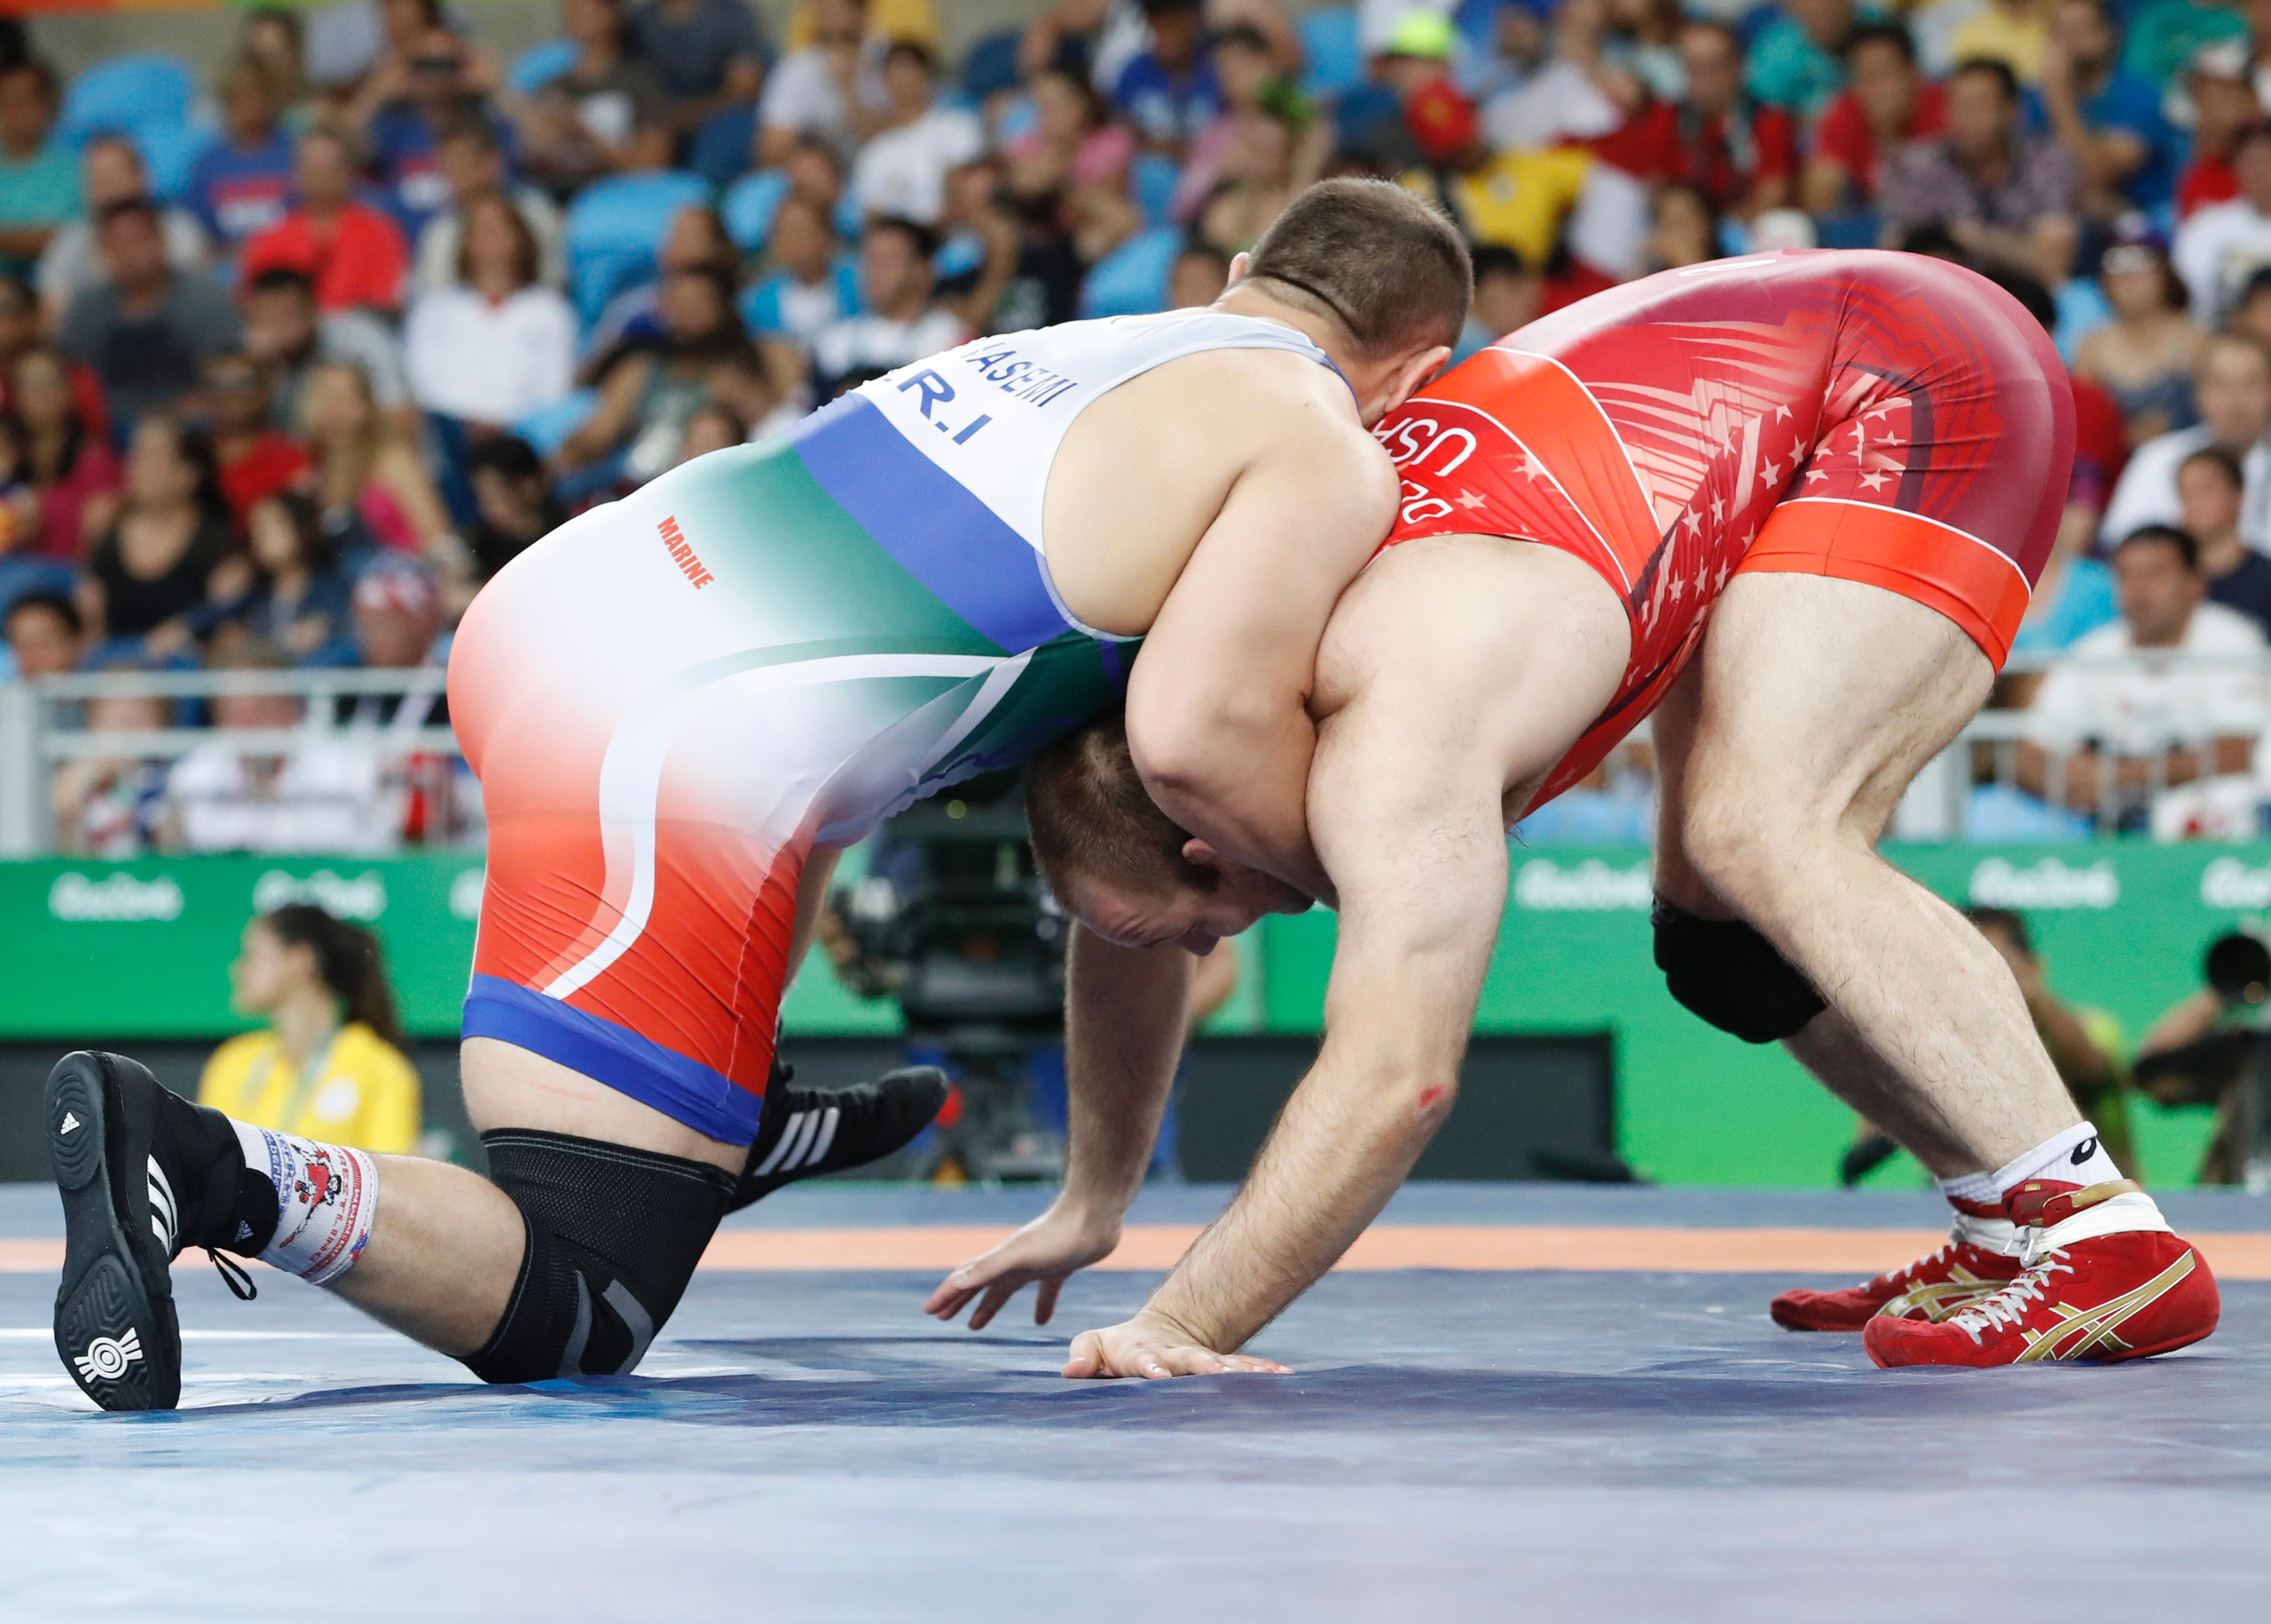 Iran's Komeil Nemat Ghasemi (left) wrestles with USA's Tervel Ivaylov Dlagnev in their men's 125kg freestyle semi-final wrestling match during the Rio 2016 Olympic Games at the Carioca Arena 2 in Rio de Janeiro on Aug. 20, 2016. (Jack Guez—AFP/Getty Images)